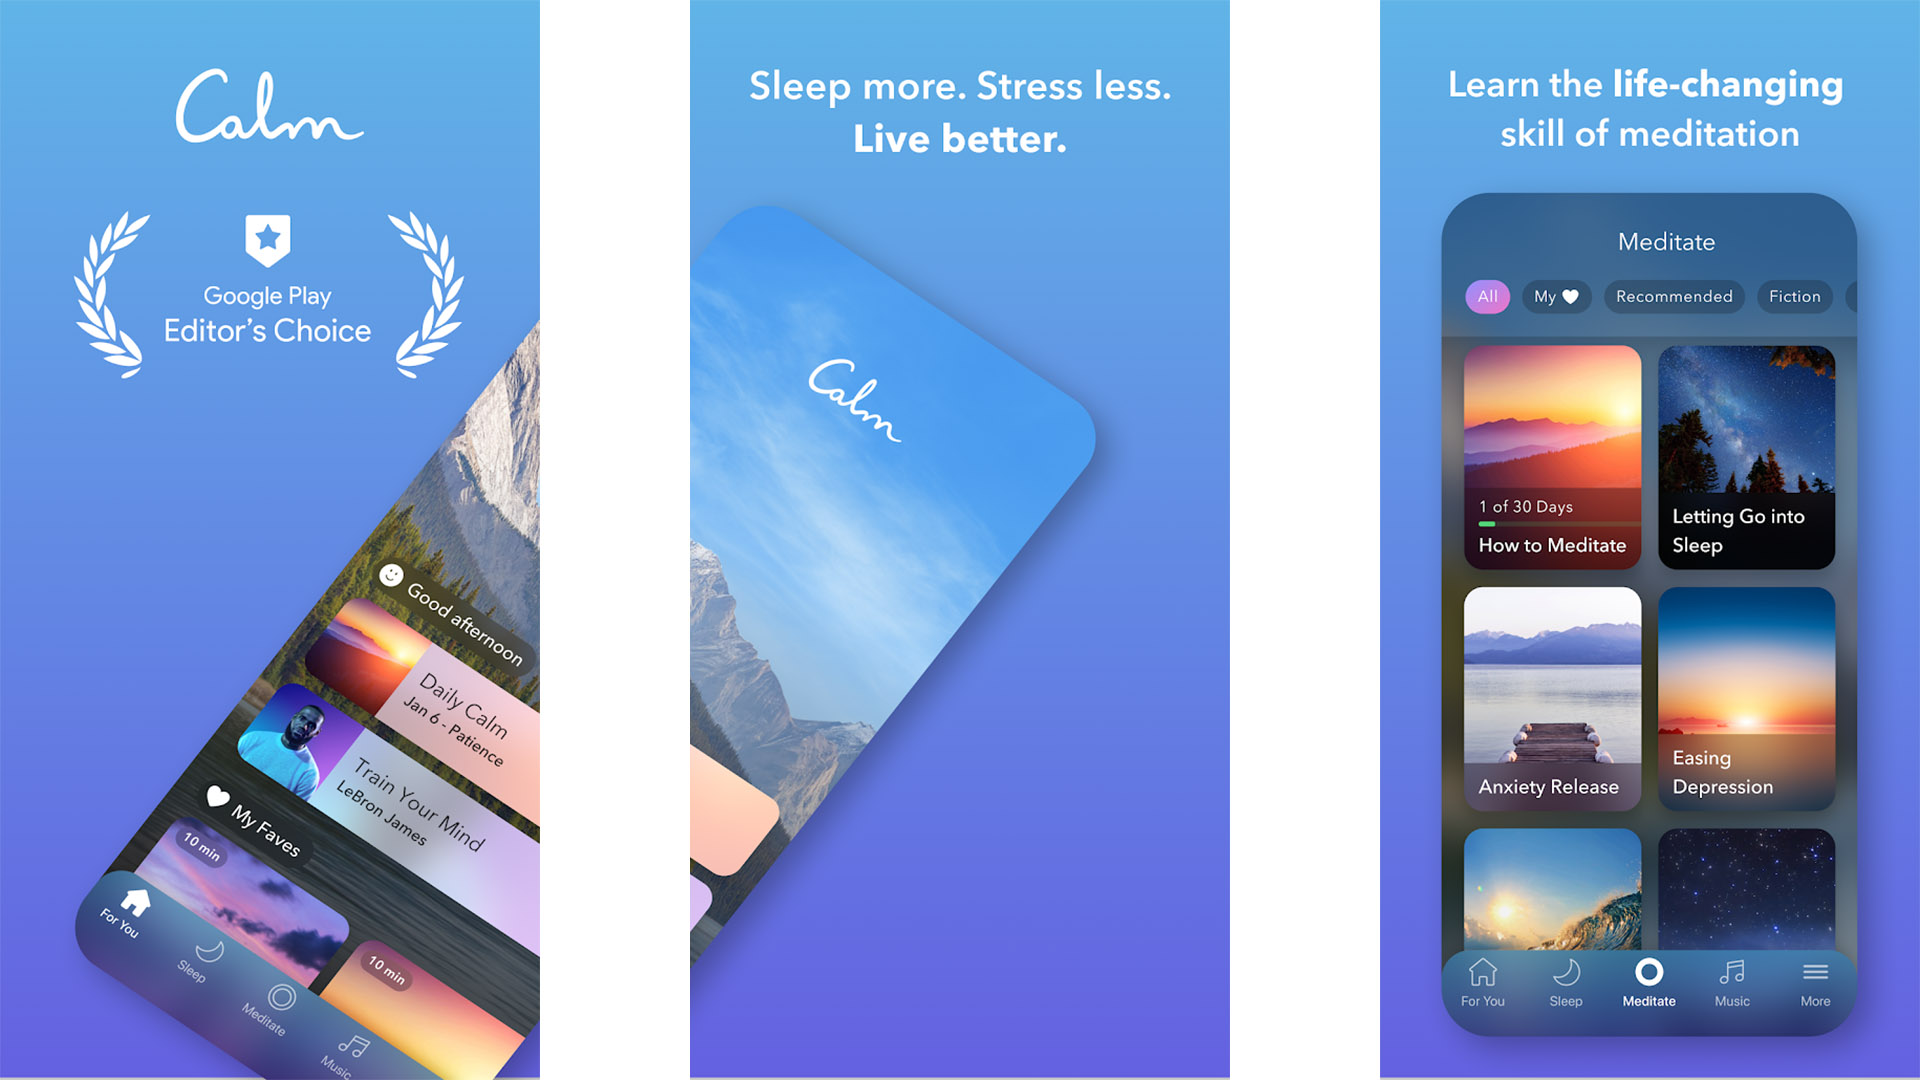 Calm app on the Google Play Store.